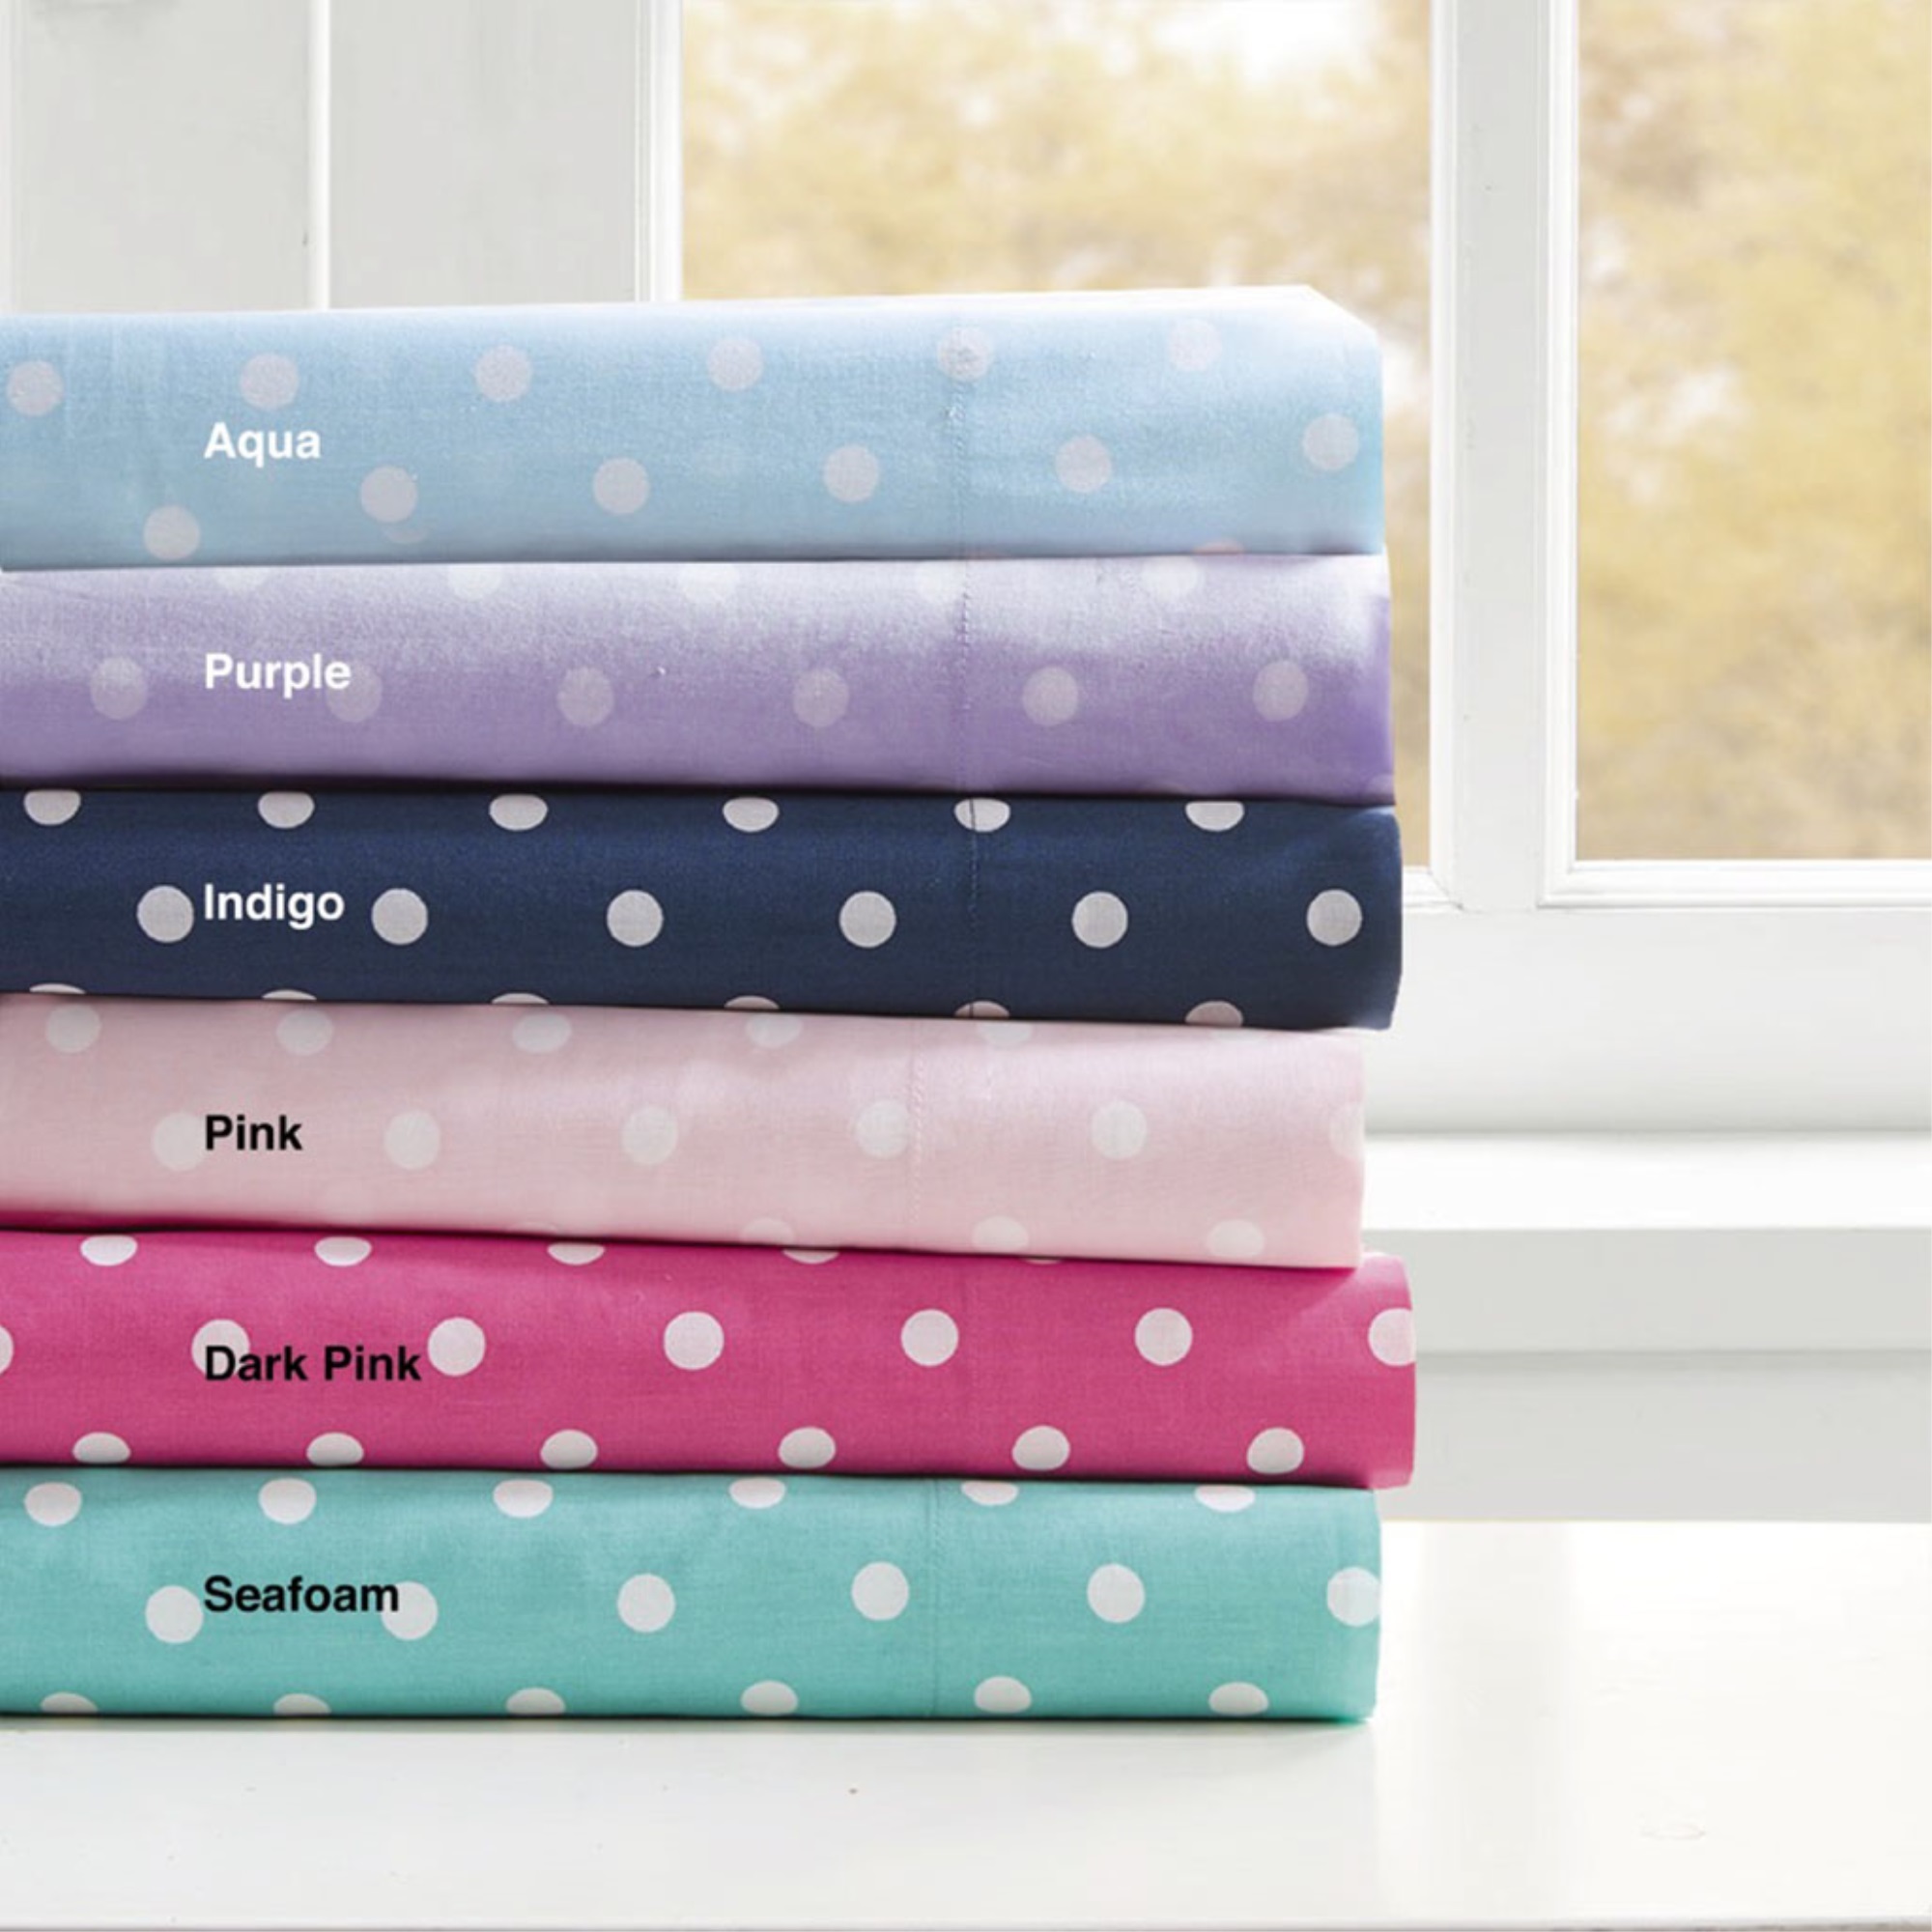 Ergode Printed 100% Cotton Sheet Set - Vibrant and Soothing Colors - OEKO-TEX Certified - Playful and Relaxed Vibe - Com